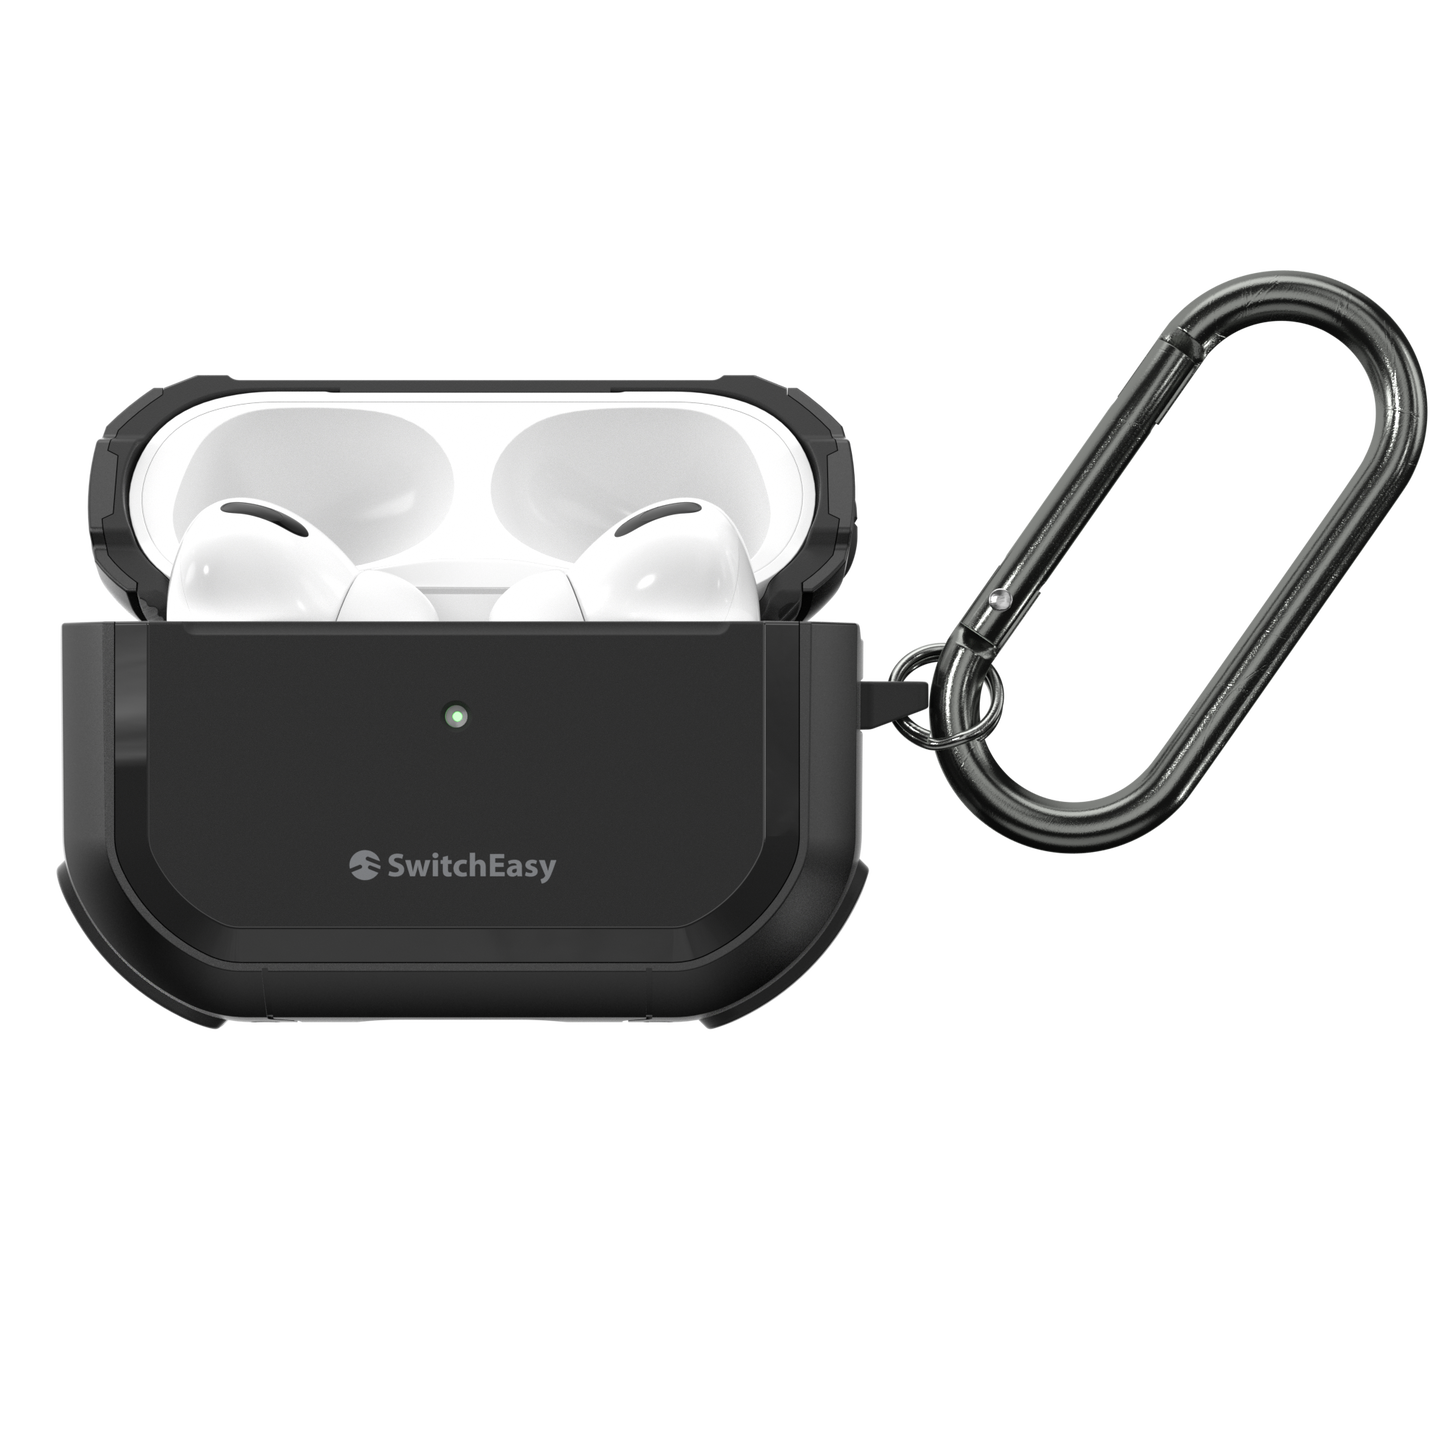 SwitchEasy Defender Rugged Utility Protective Case for Apple AirPods Pro 2&1